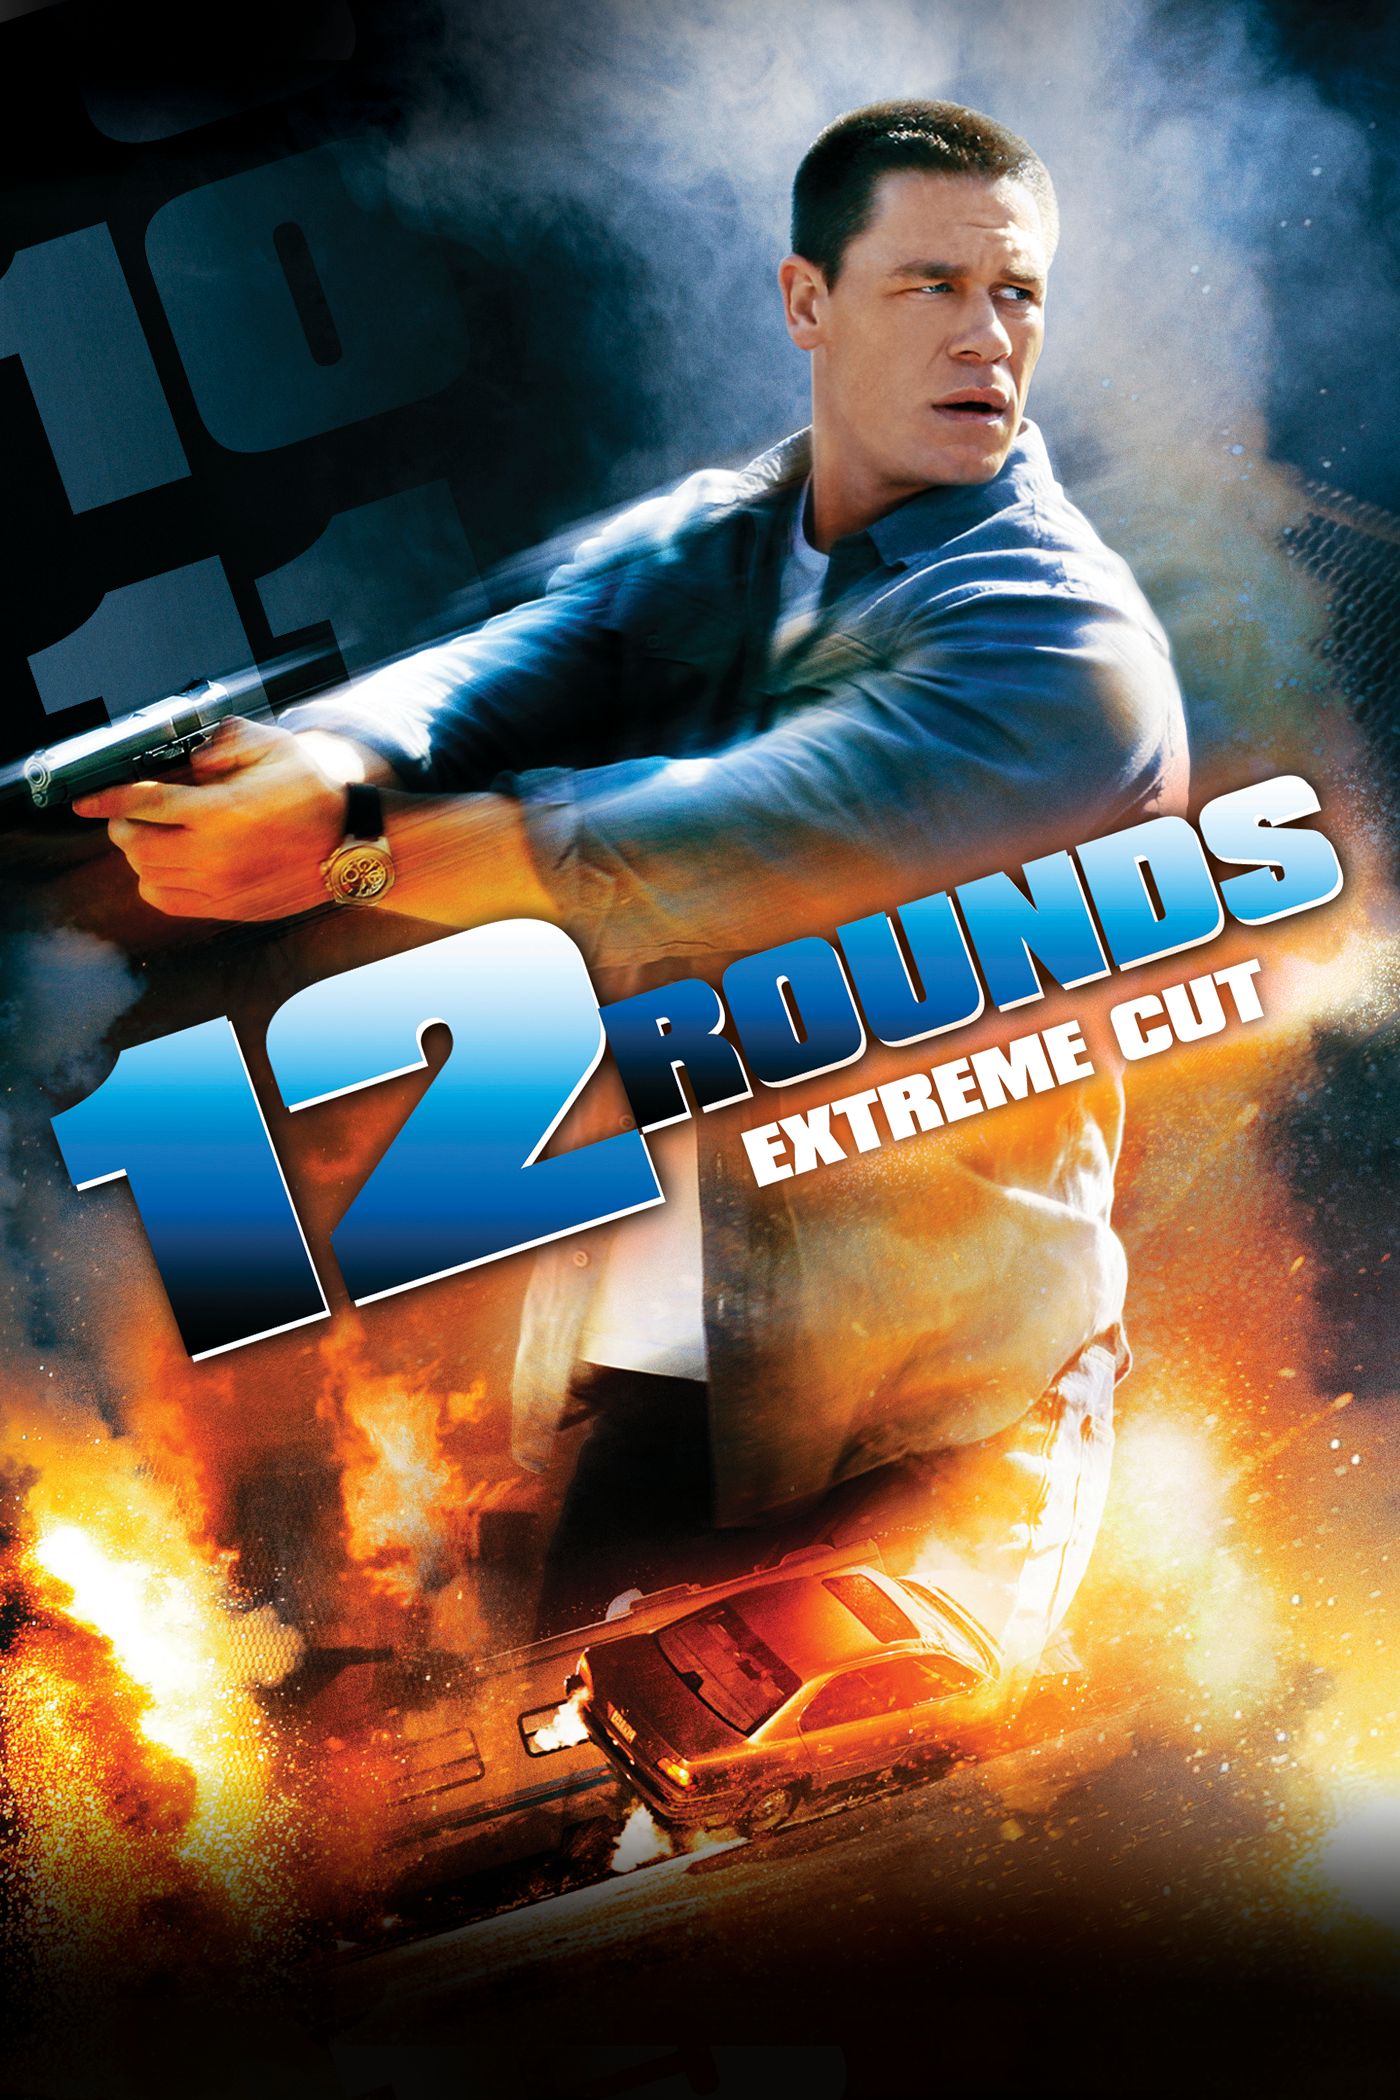 Pre-owned - 12 Rounds 2: Reloaded (DVD) 